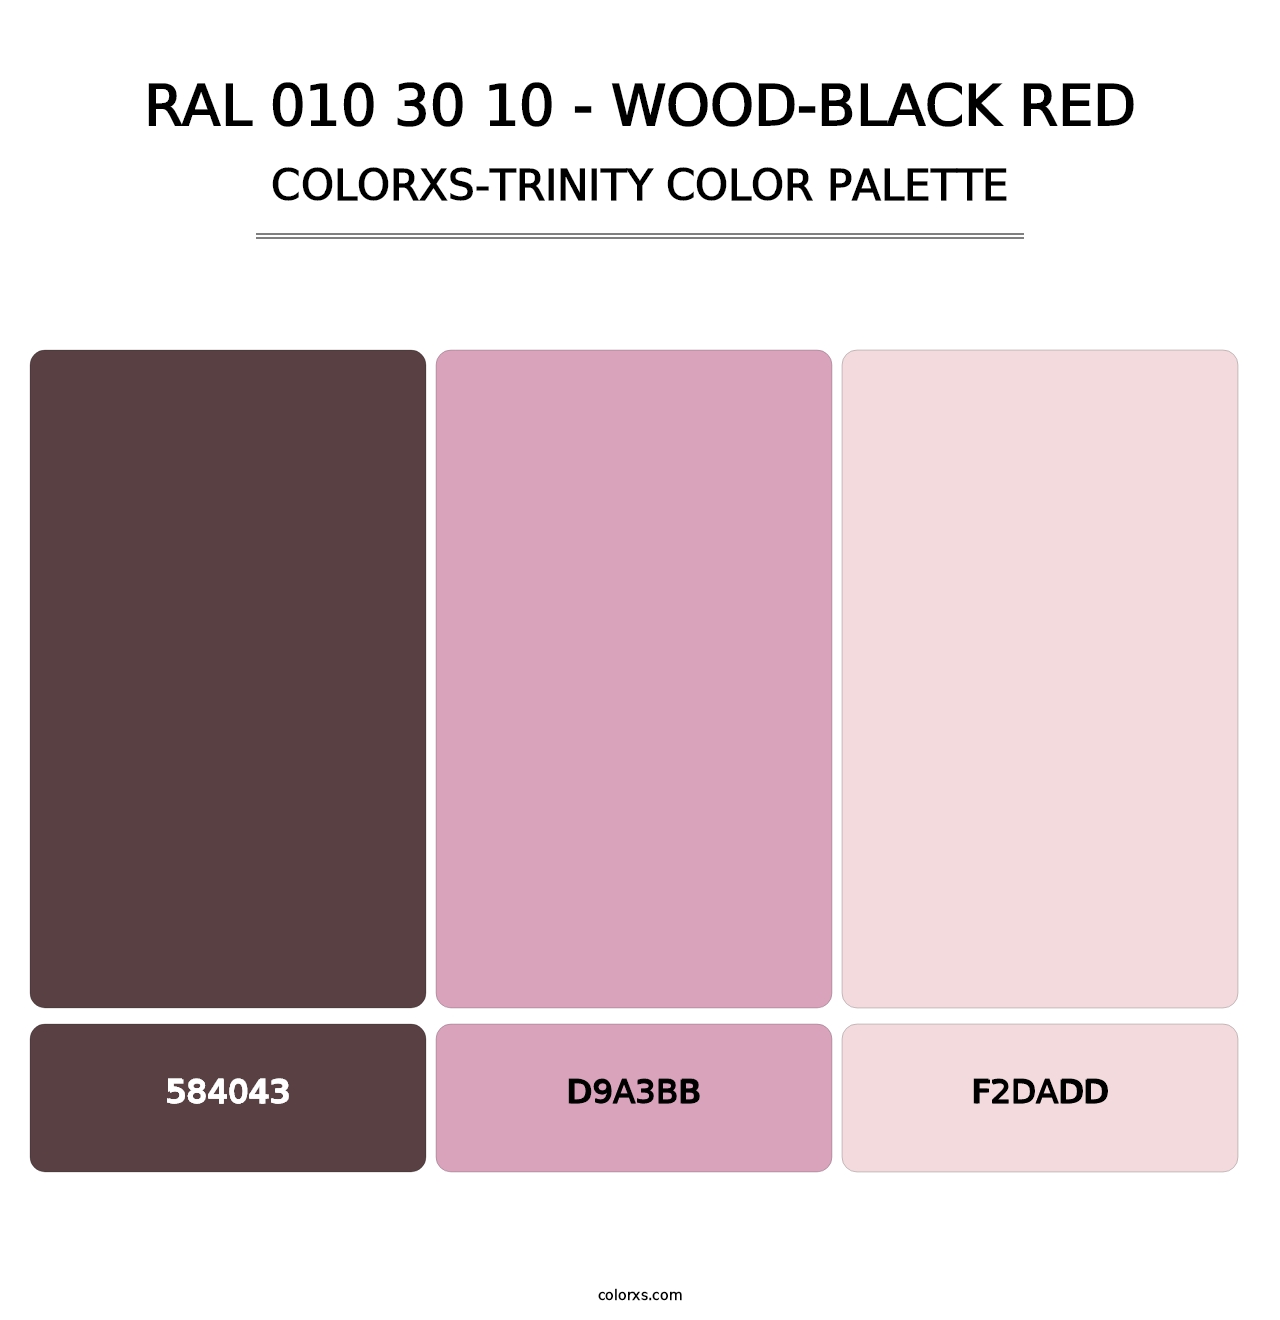 RAL 010 30 10 - Wood-Black Red - Colorxs Trinity Palette